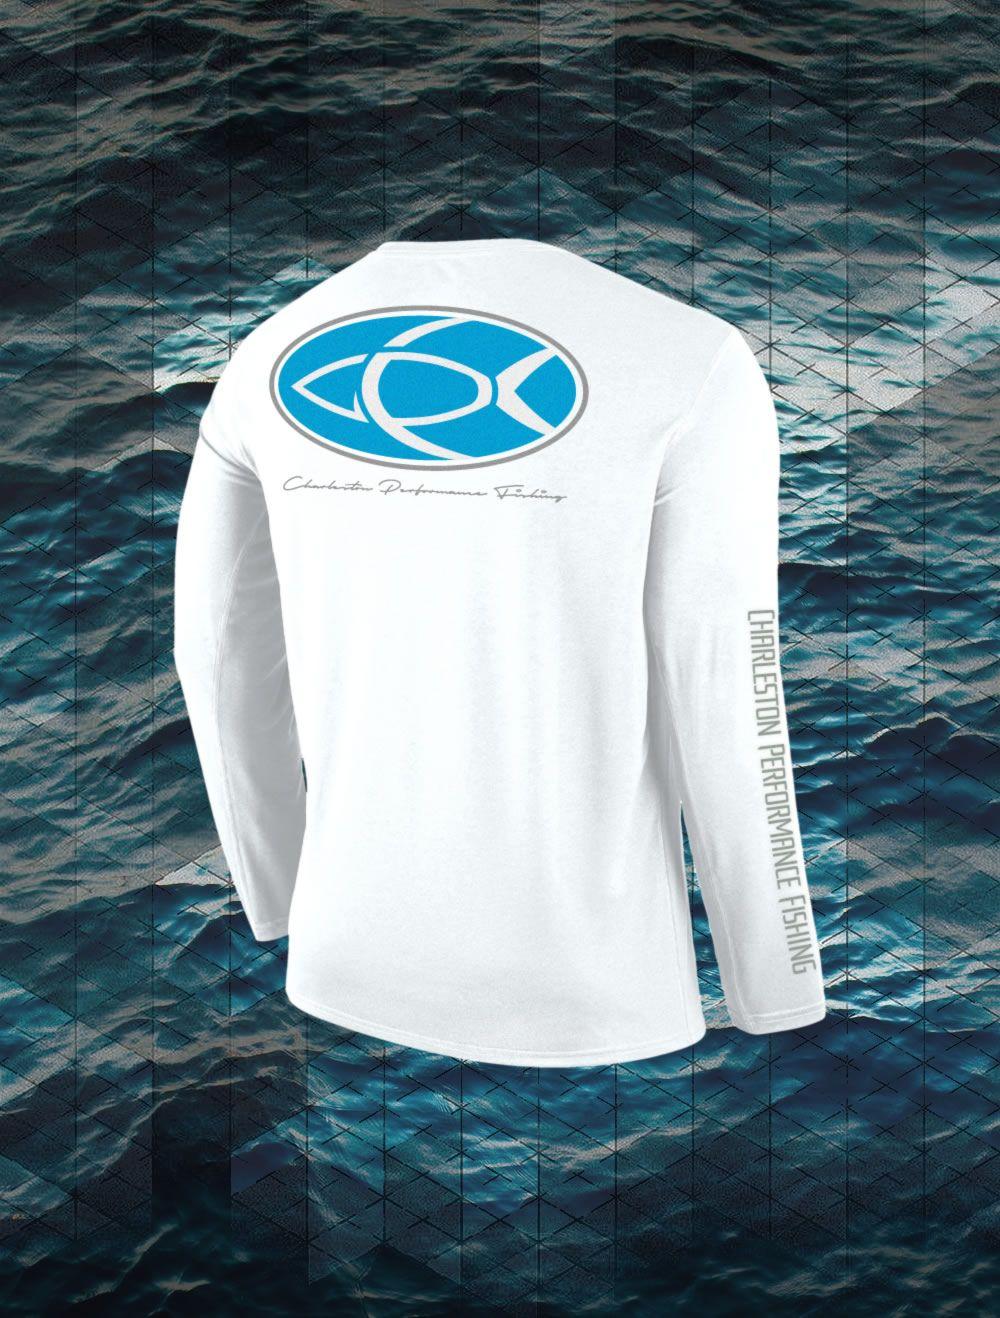 White and Blue Oval Logo - Oval Fish Back Blue Graphic White Long Sleeve Performance Fishing ...